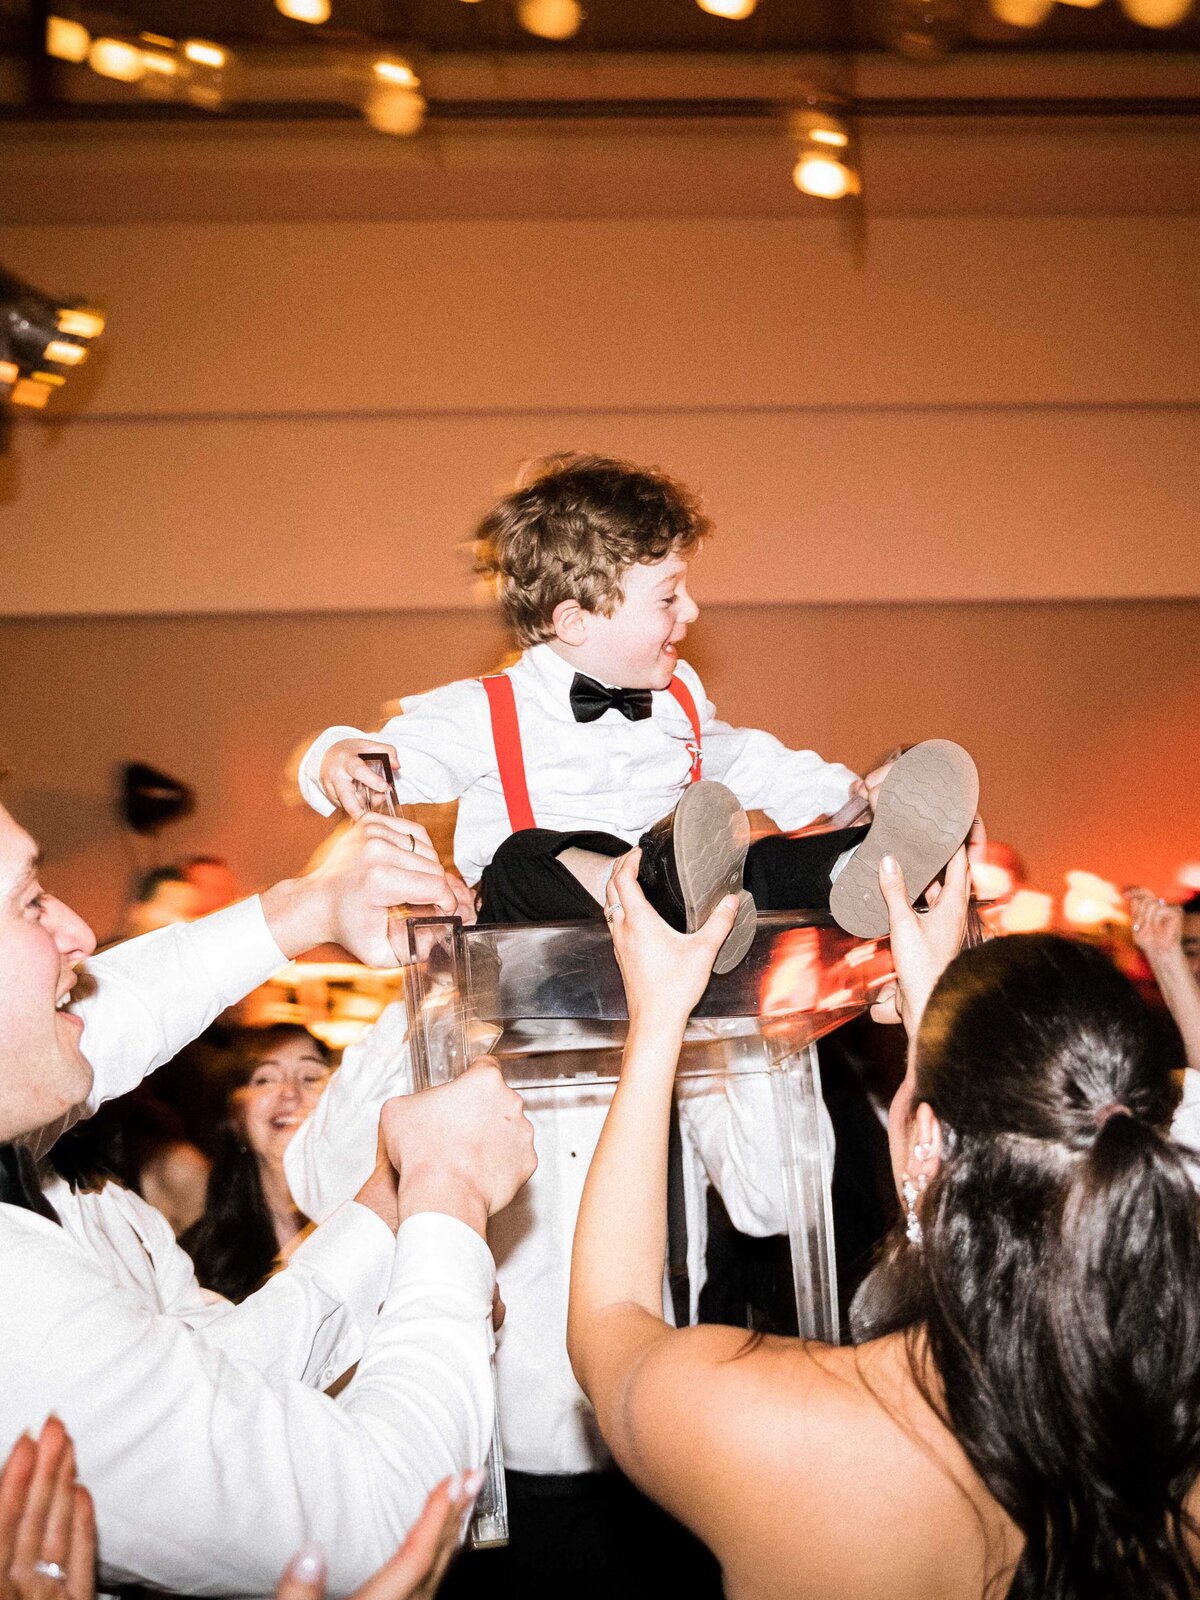 Child lifted on chair during wedding reception at park hyatt